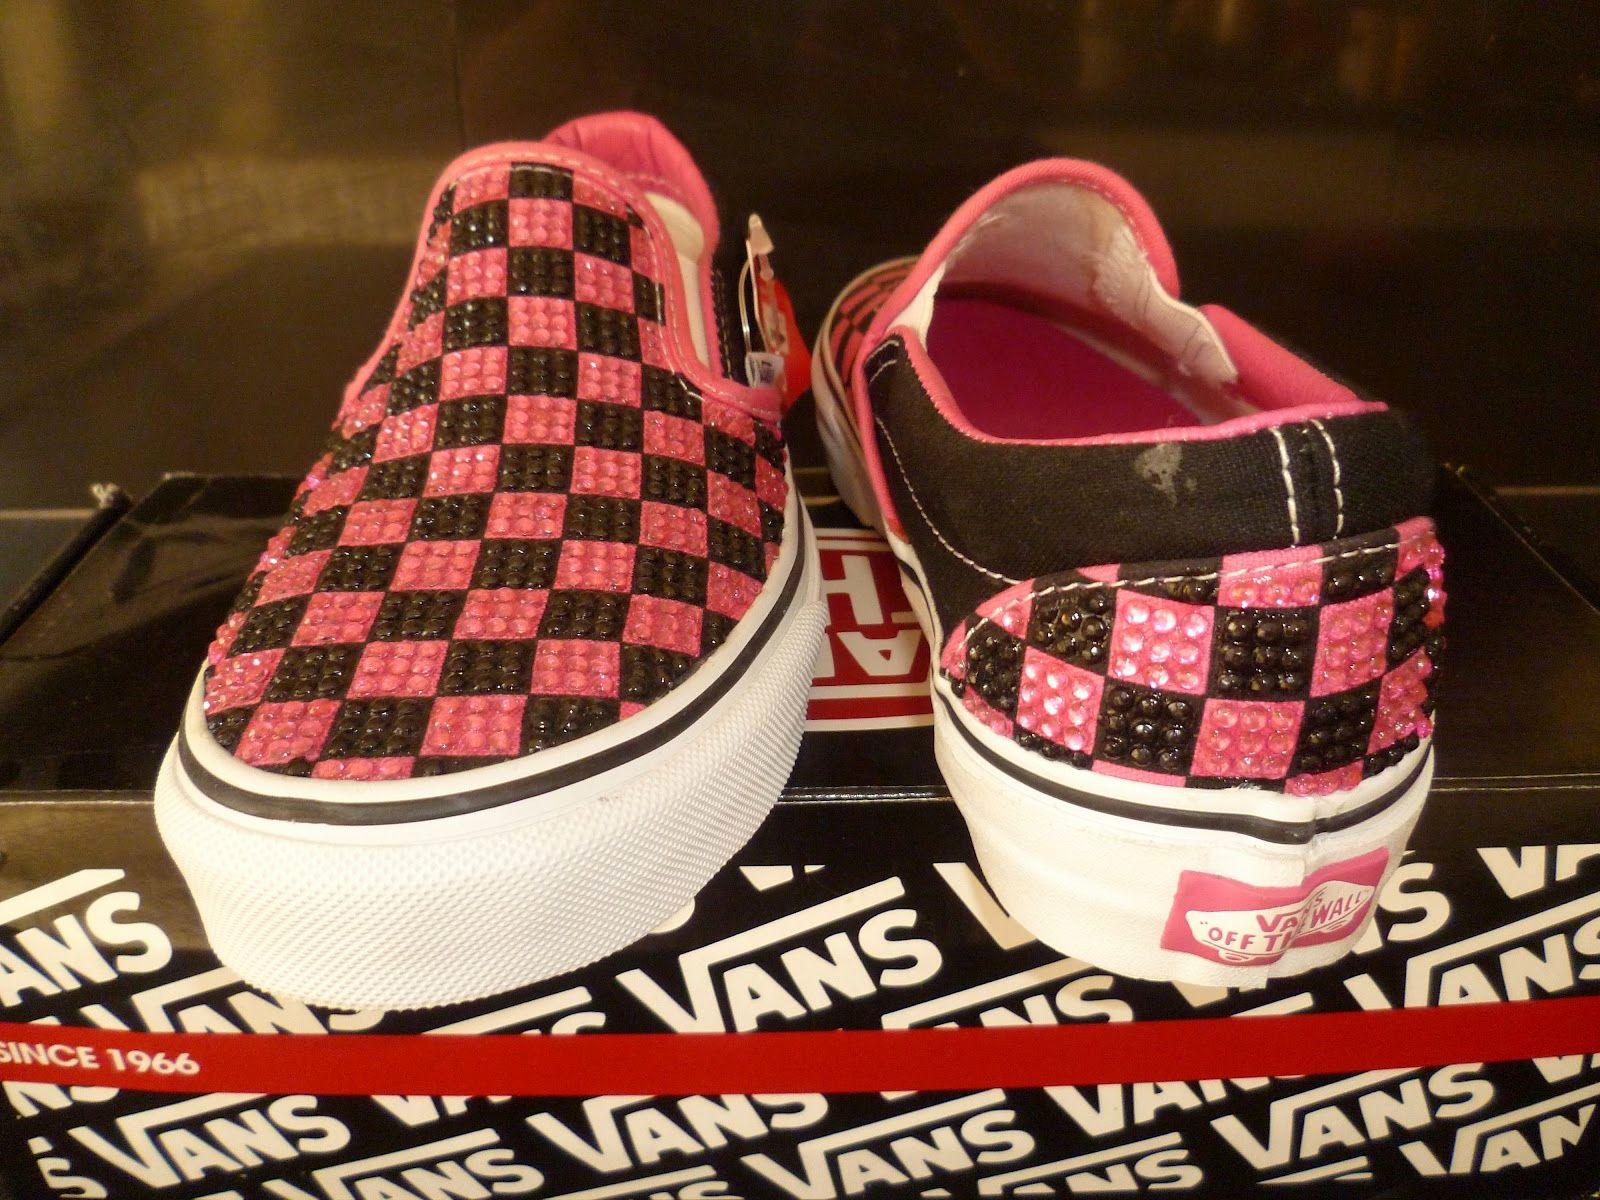 Awesome Vans Wallpaper Picture Wallpaper Collection. HD